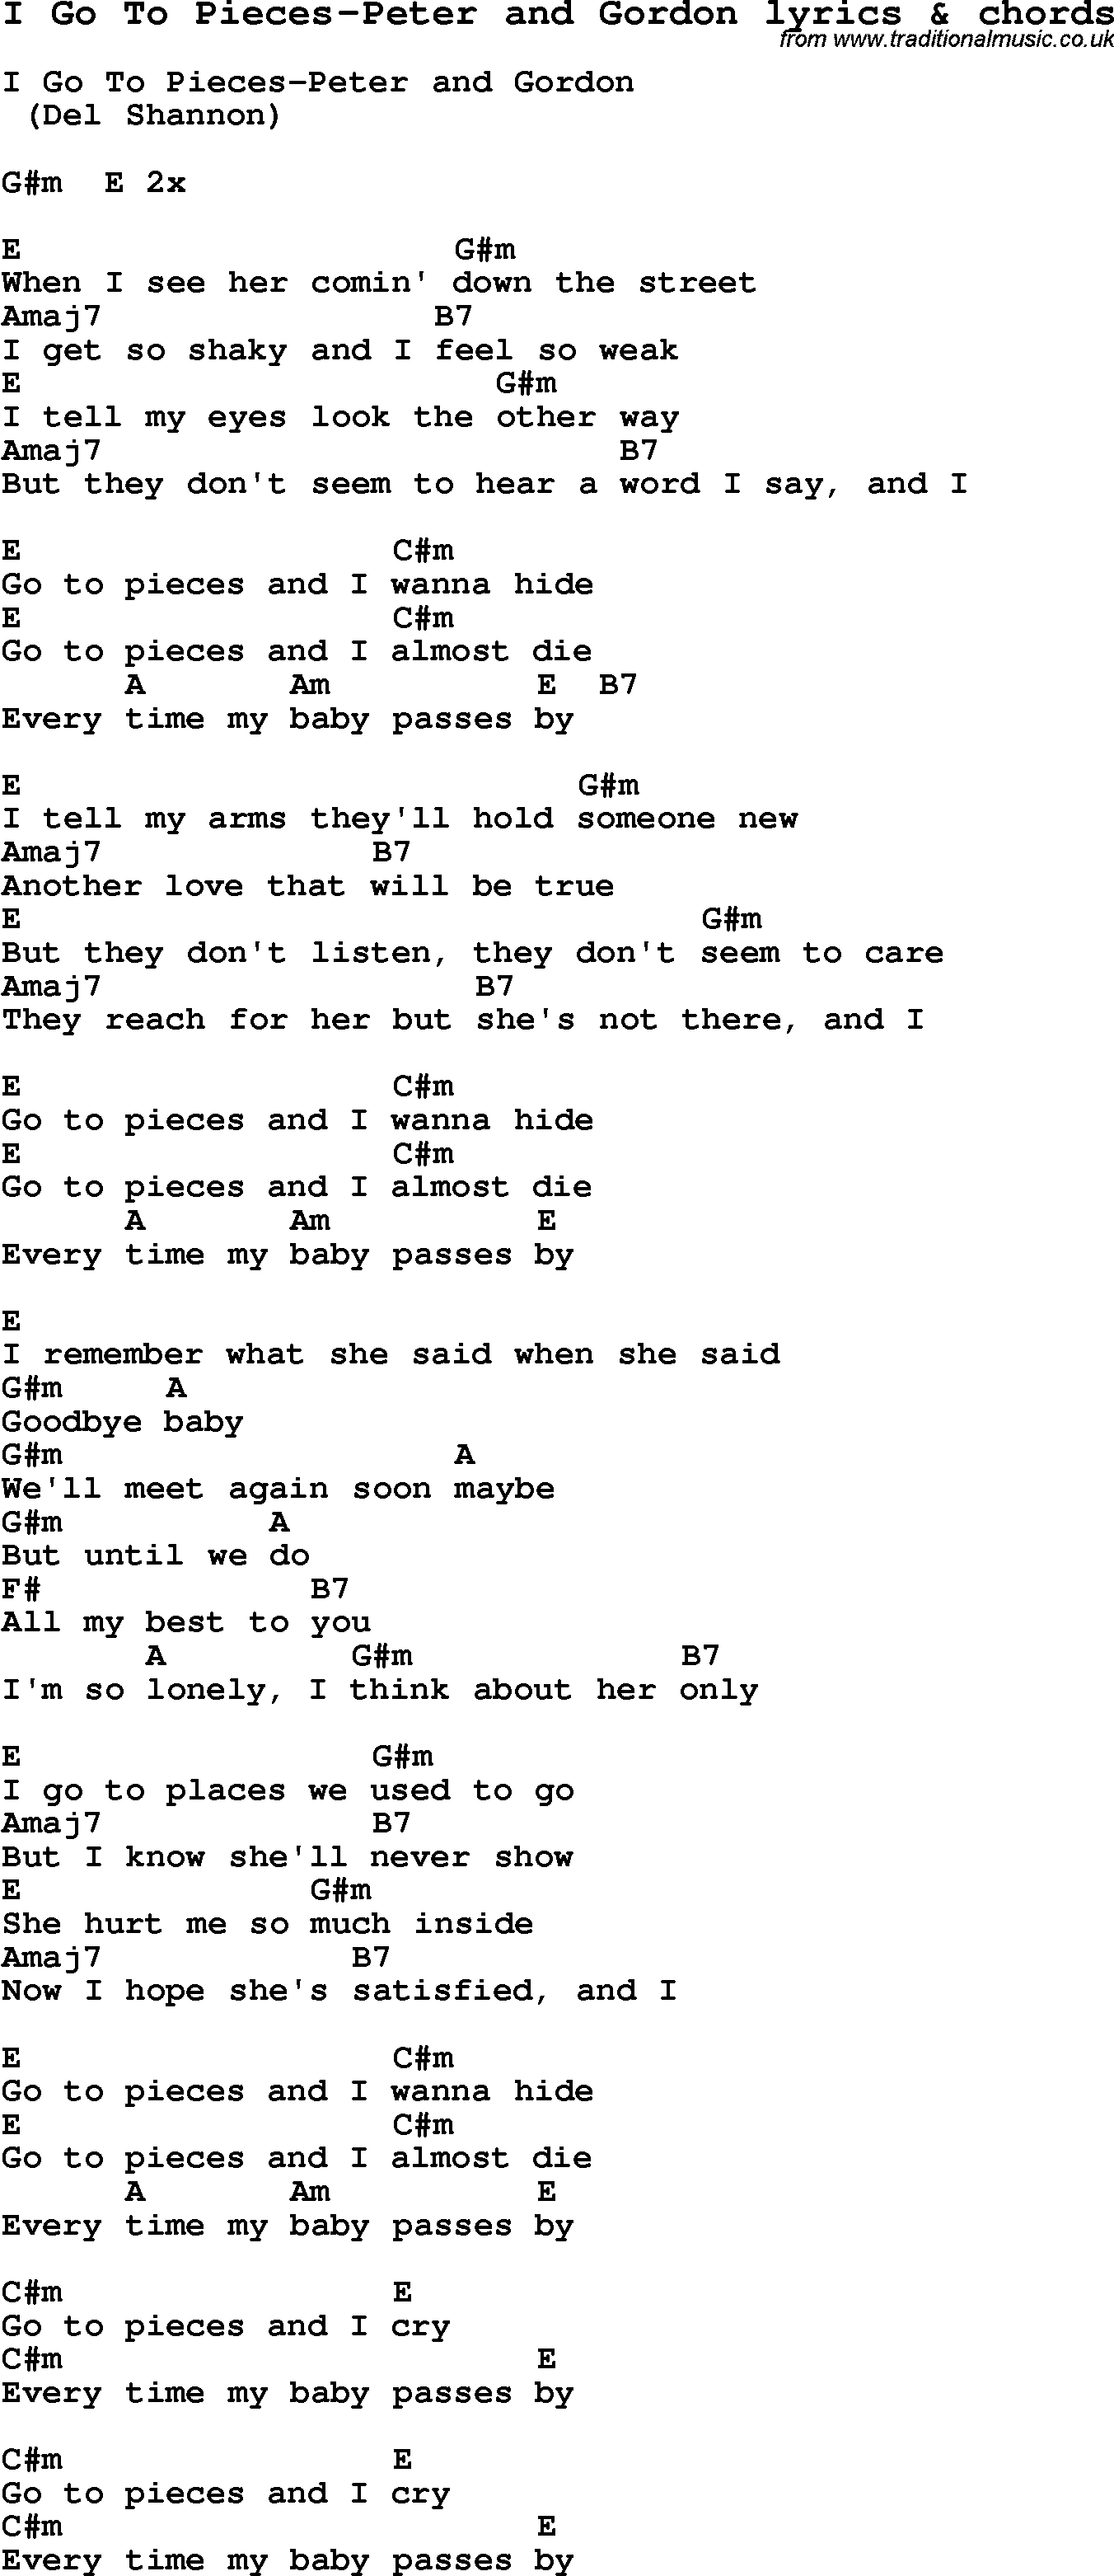 Love Song Lyrics for: I Go To Pieces-Peter and Gordon with chords for Ukulele, Guitar Banjo etc.